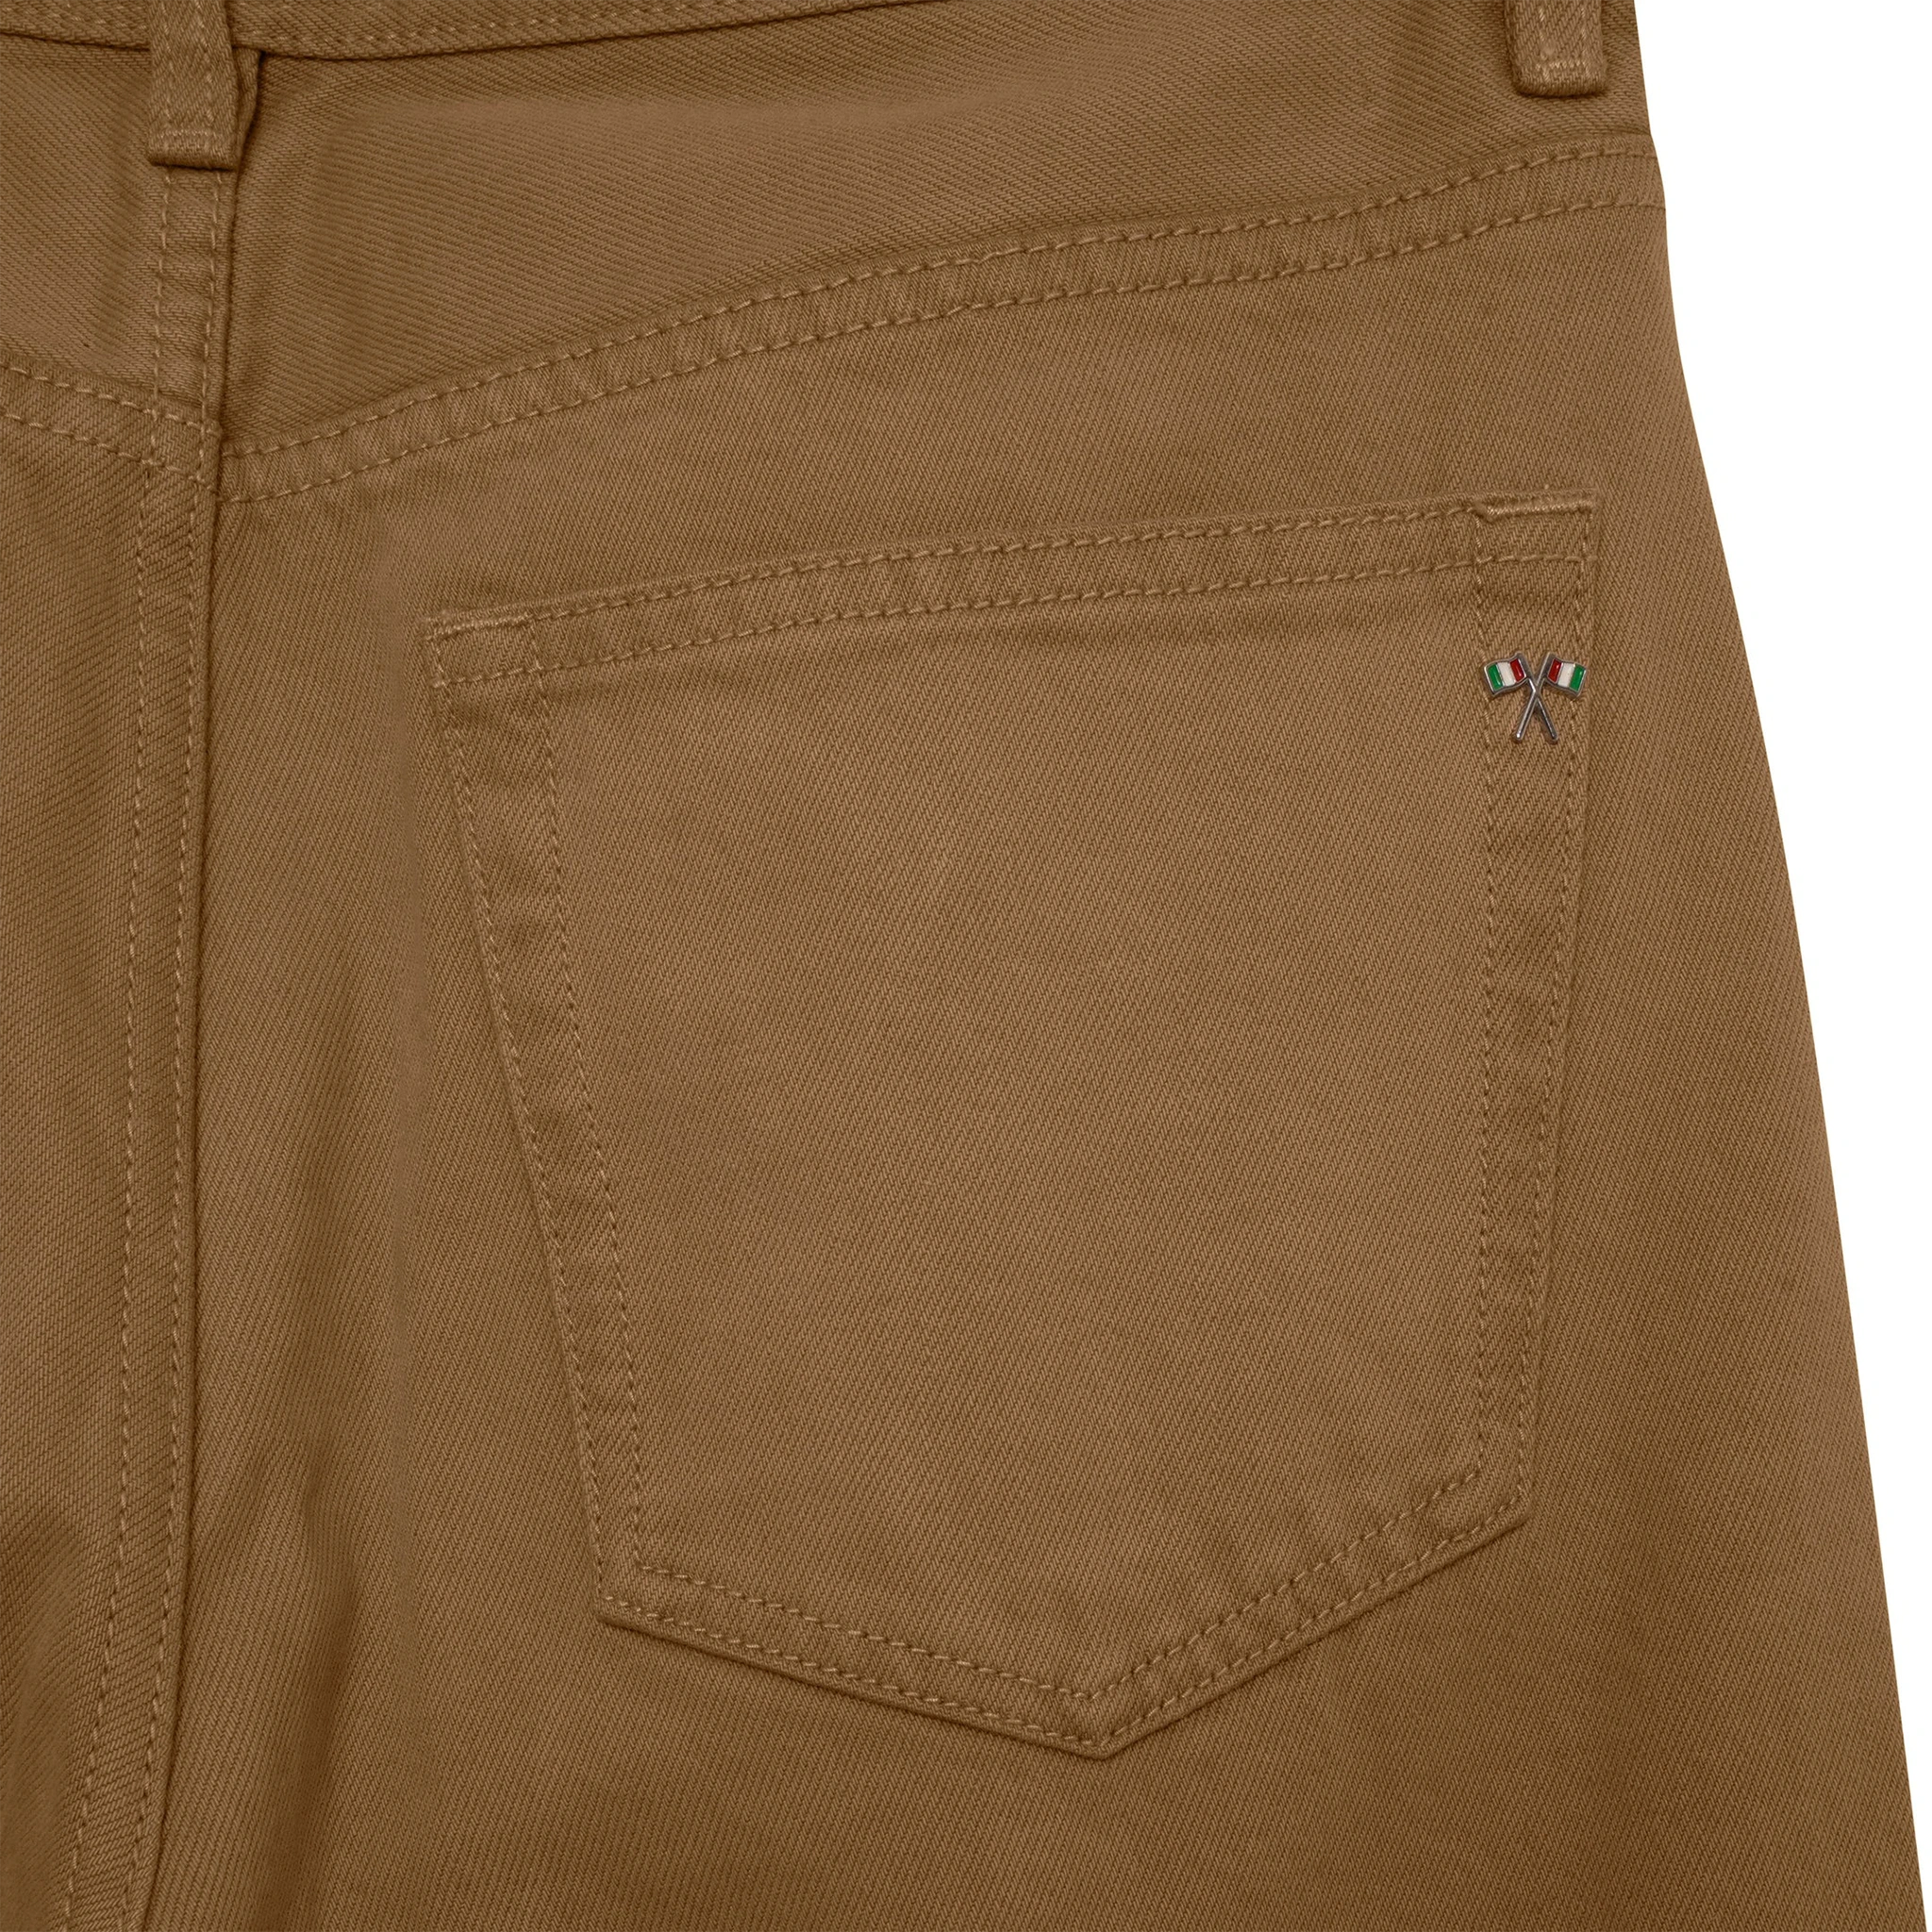 Pocket view of Amicci Axel Contrast Panel Jeans Tan AMJ08SAN